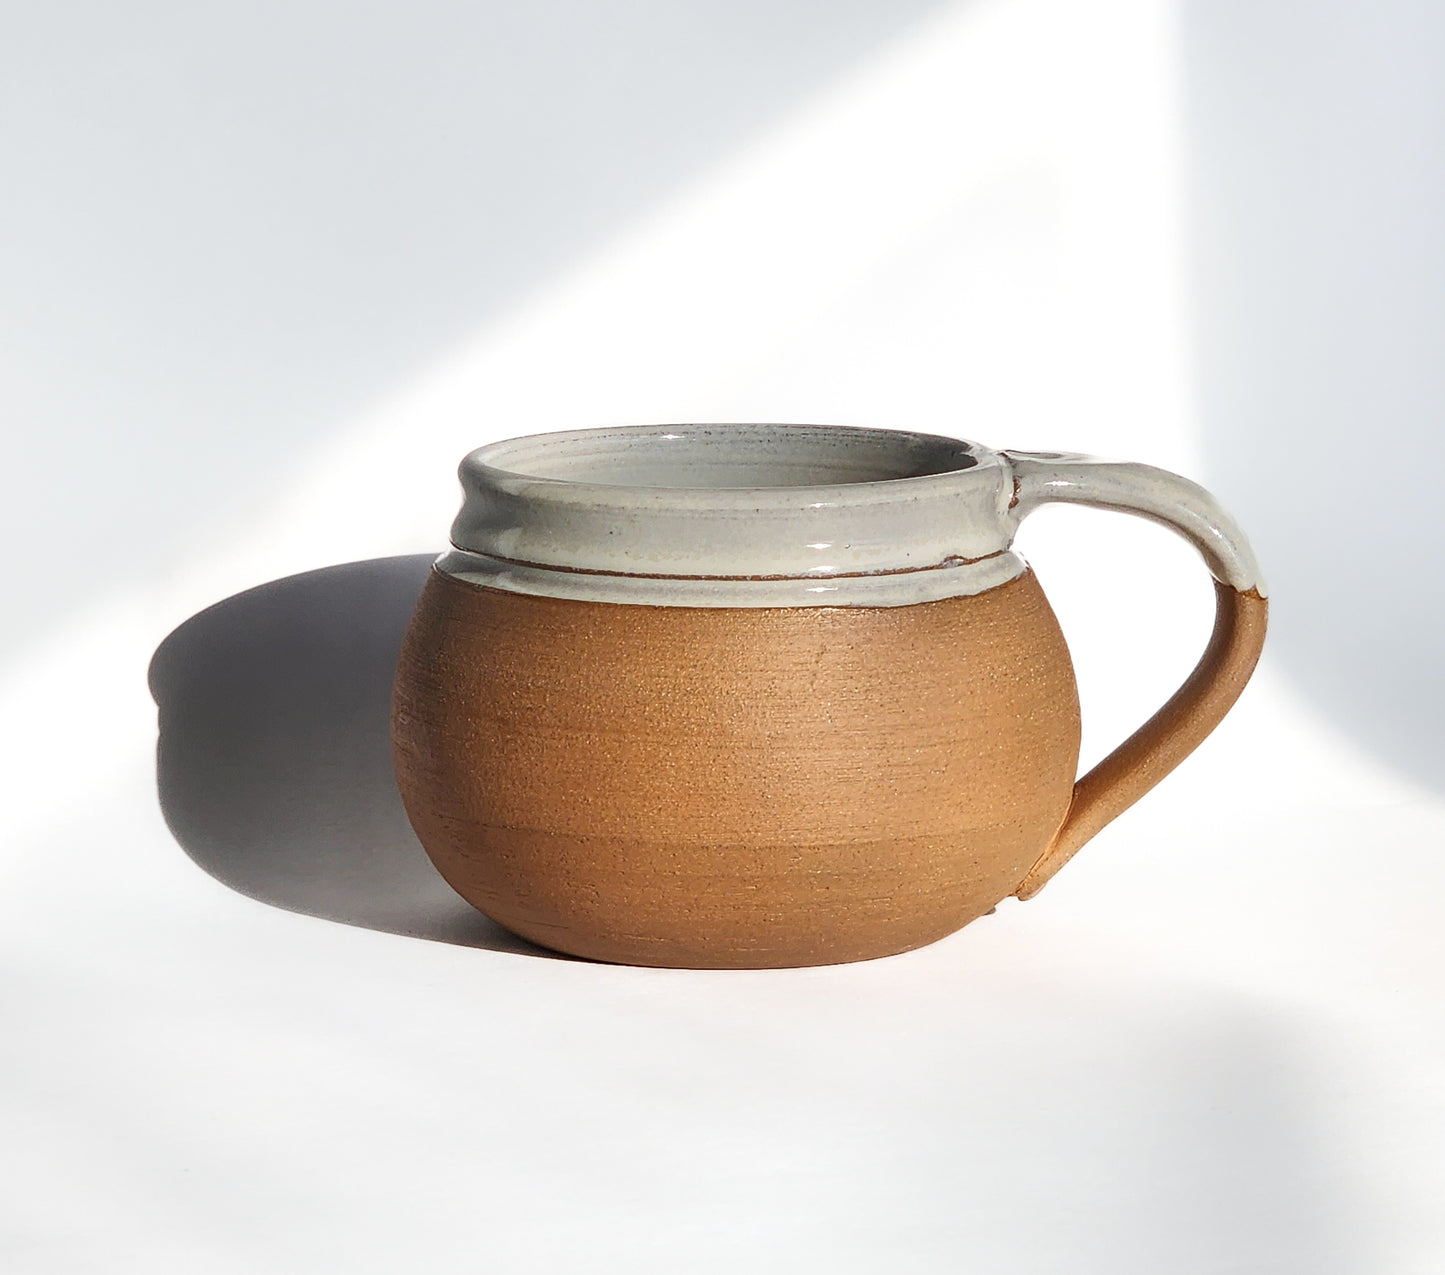 Image: Clinton Pottery's 24 oz Cereal/Soup Mug in Natural (Unglazed) – Embracing simplicity and authenticity, this machine washable mug seamlessly blends artistry with functionality. The unglazed exterior offers a raw and organic feel, reminiscent of earthen pottery and rustic charm. Perfect for enjoying your favorite cereal or soup, bringing a touch of elemental elegance to your dining experience.